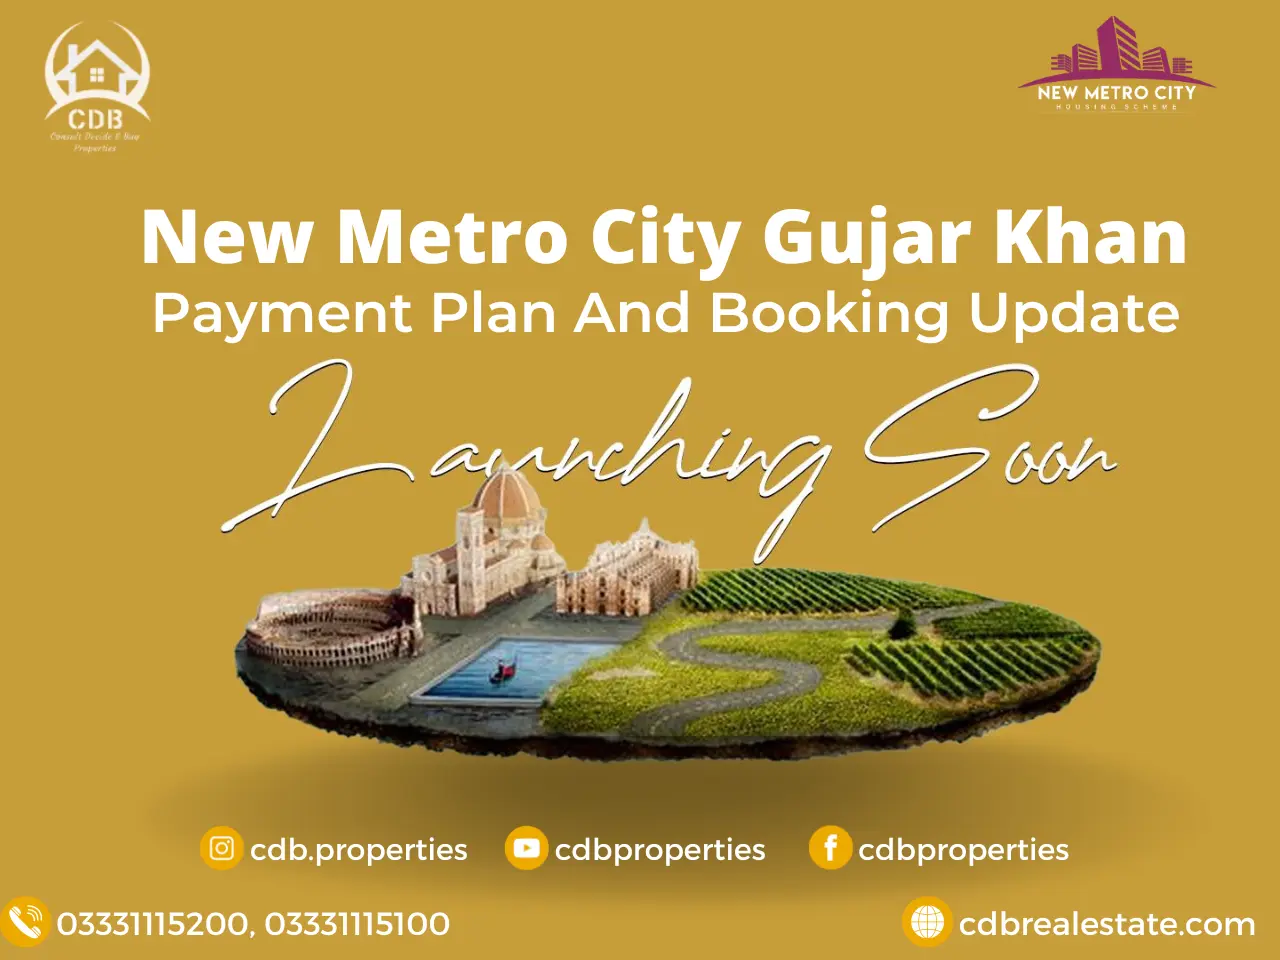 New Metro City Gujar Khan Payment Plan and Booking